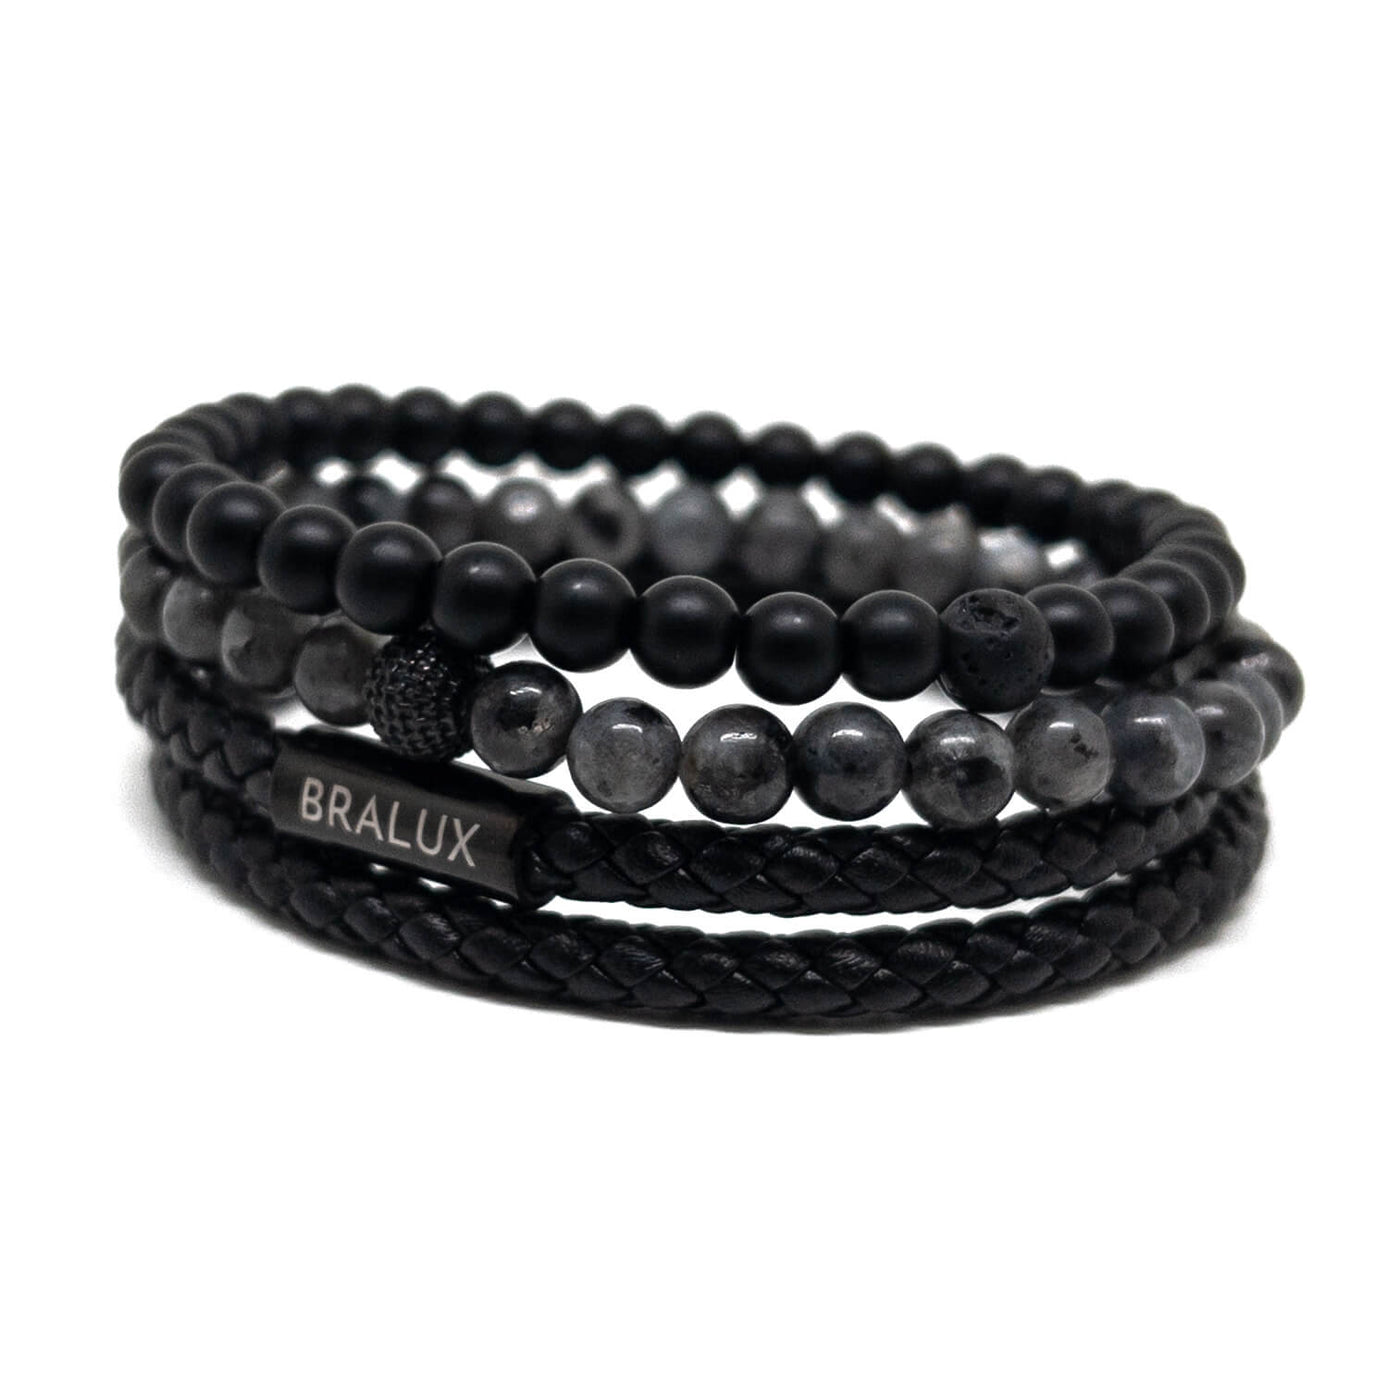 The Duo Black Leather Stack SS